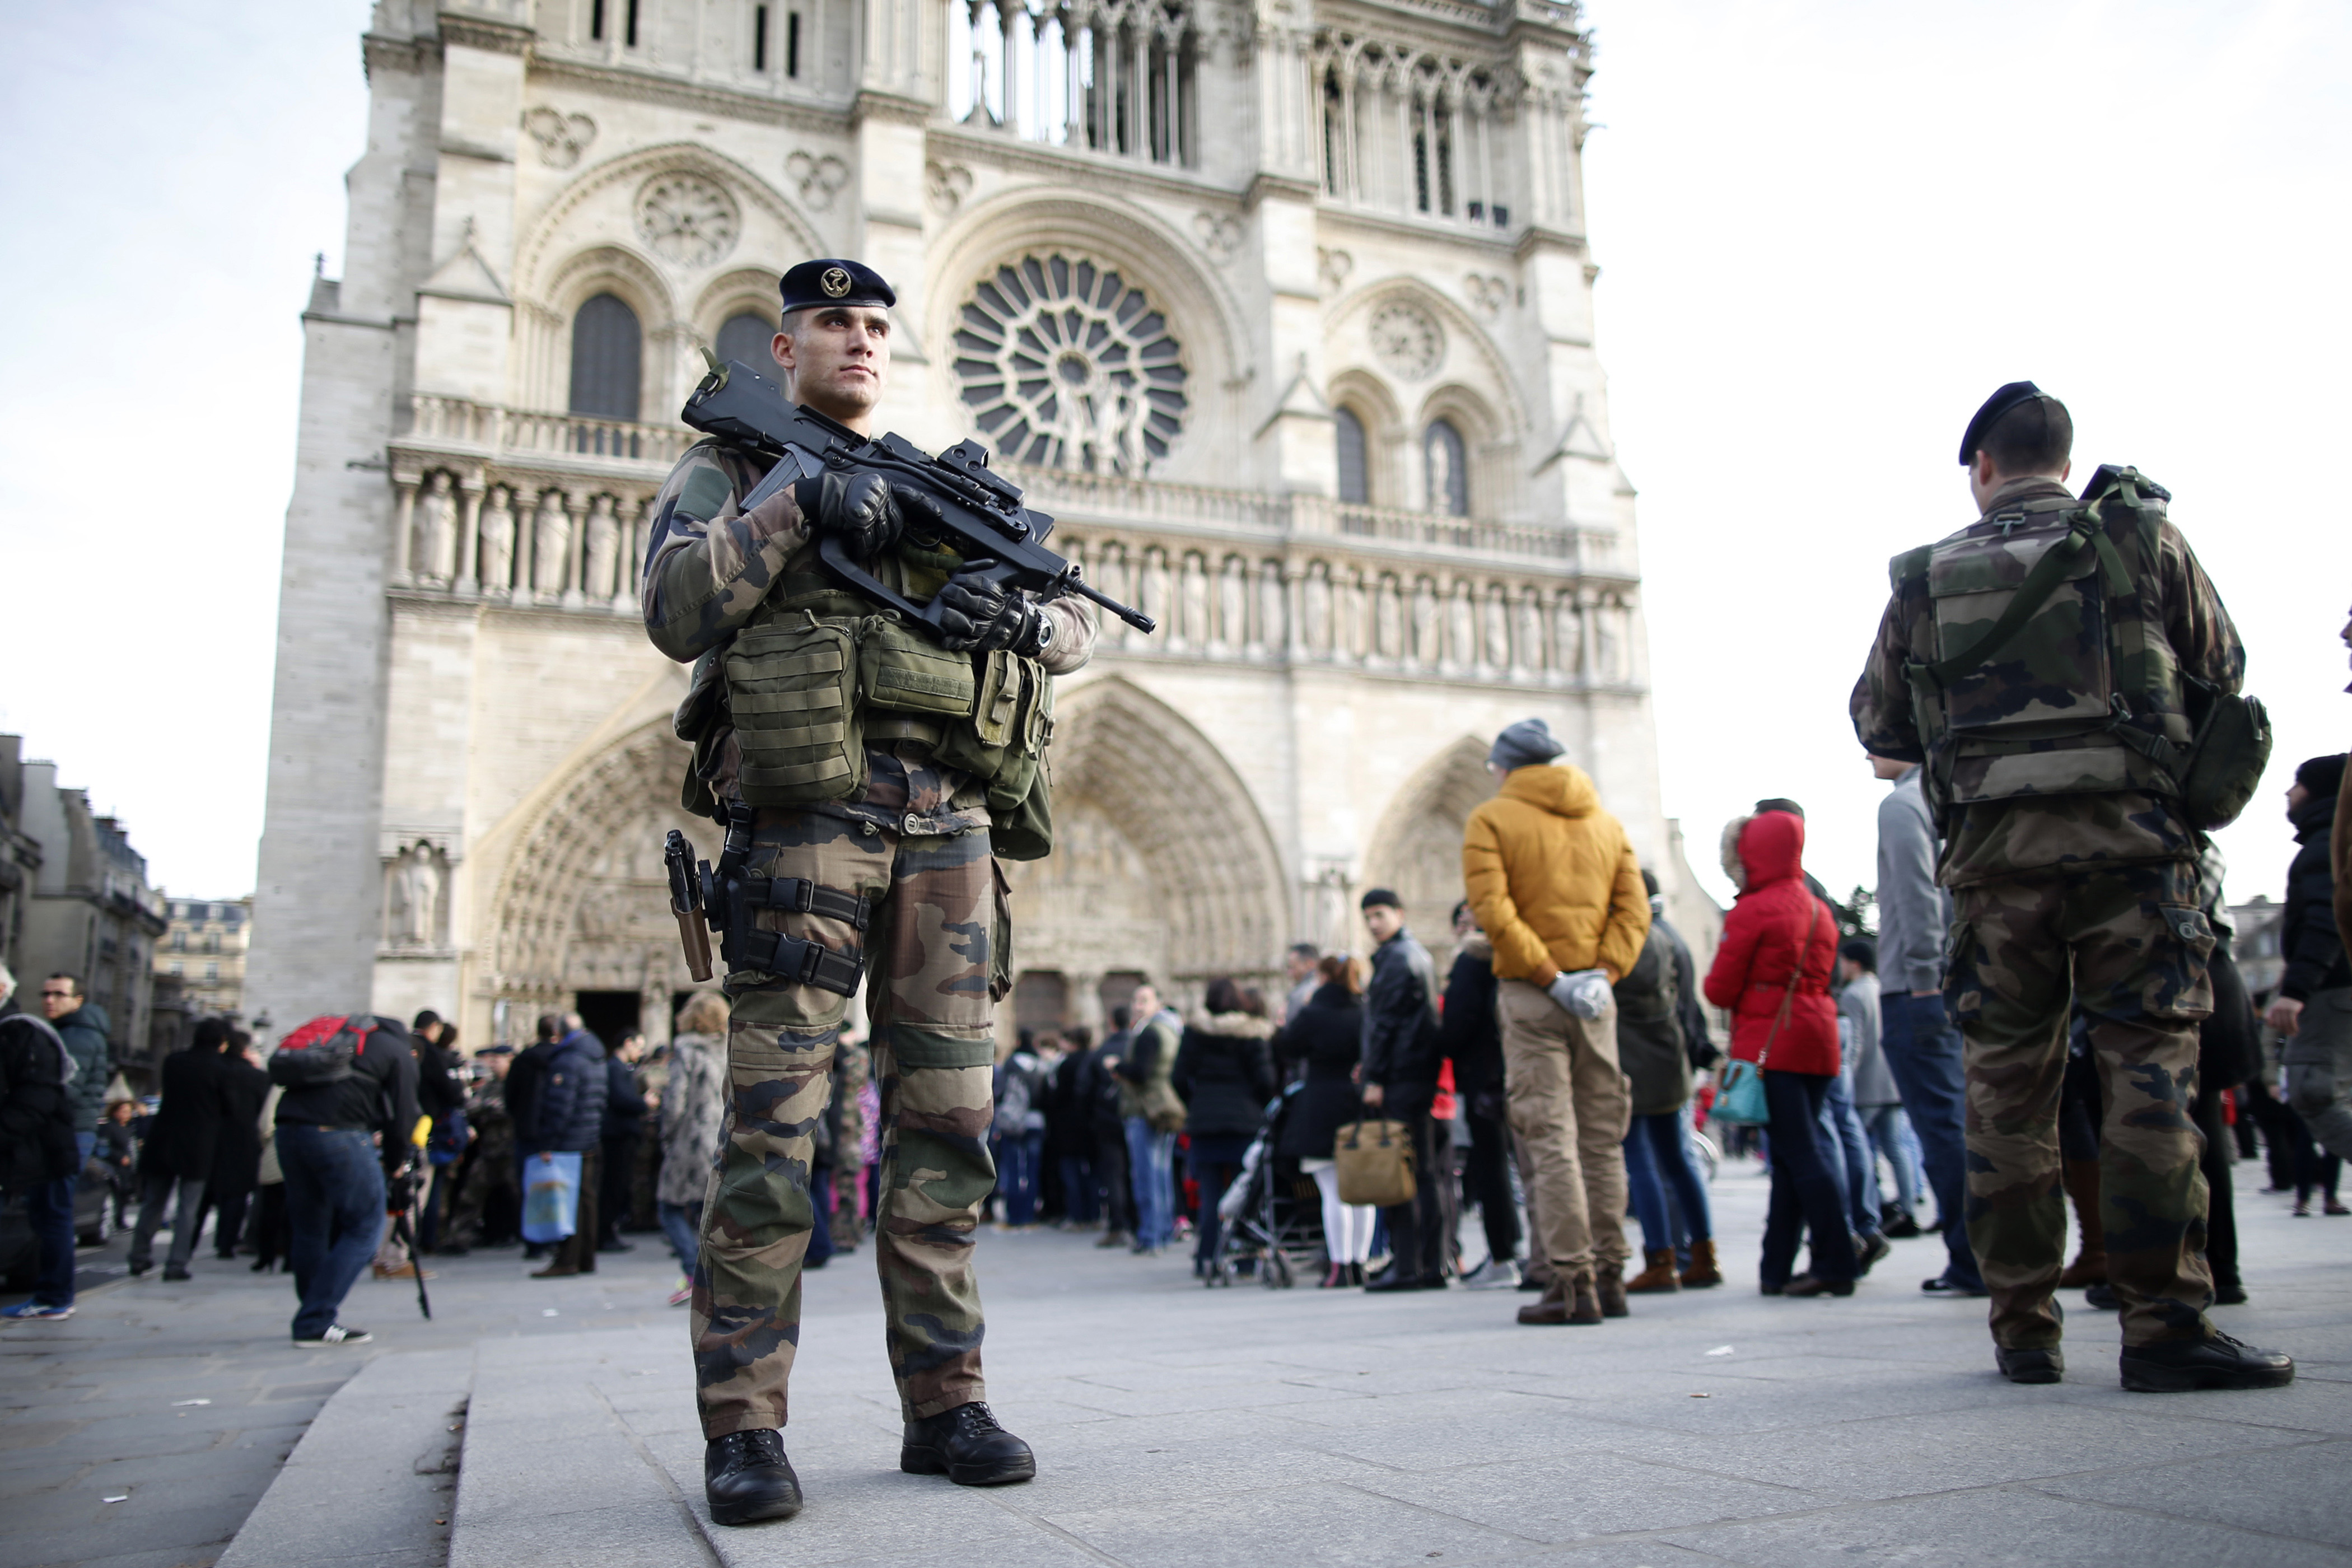 An ISIS Plot to Blow Up Notre Dame Cathedral—and Rule the World?